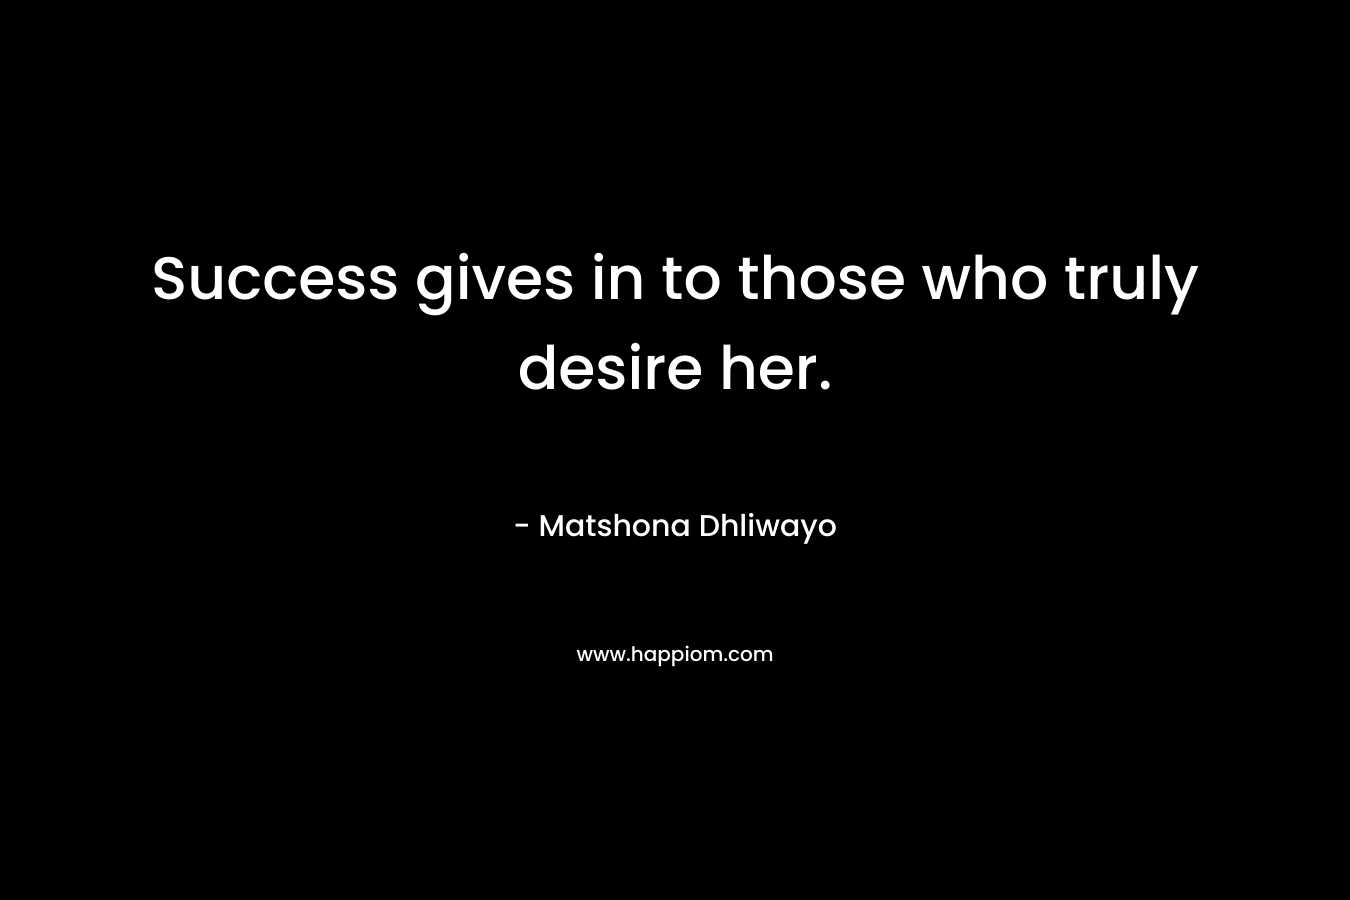 Success gives in to those who truly desire her.